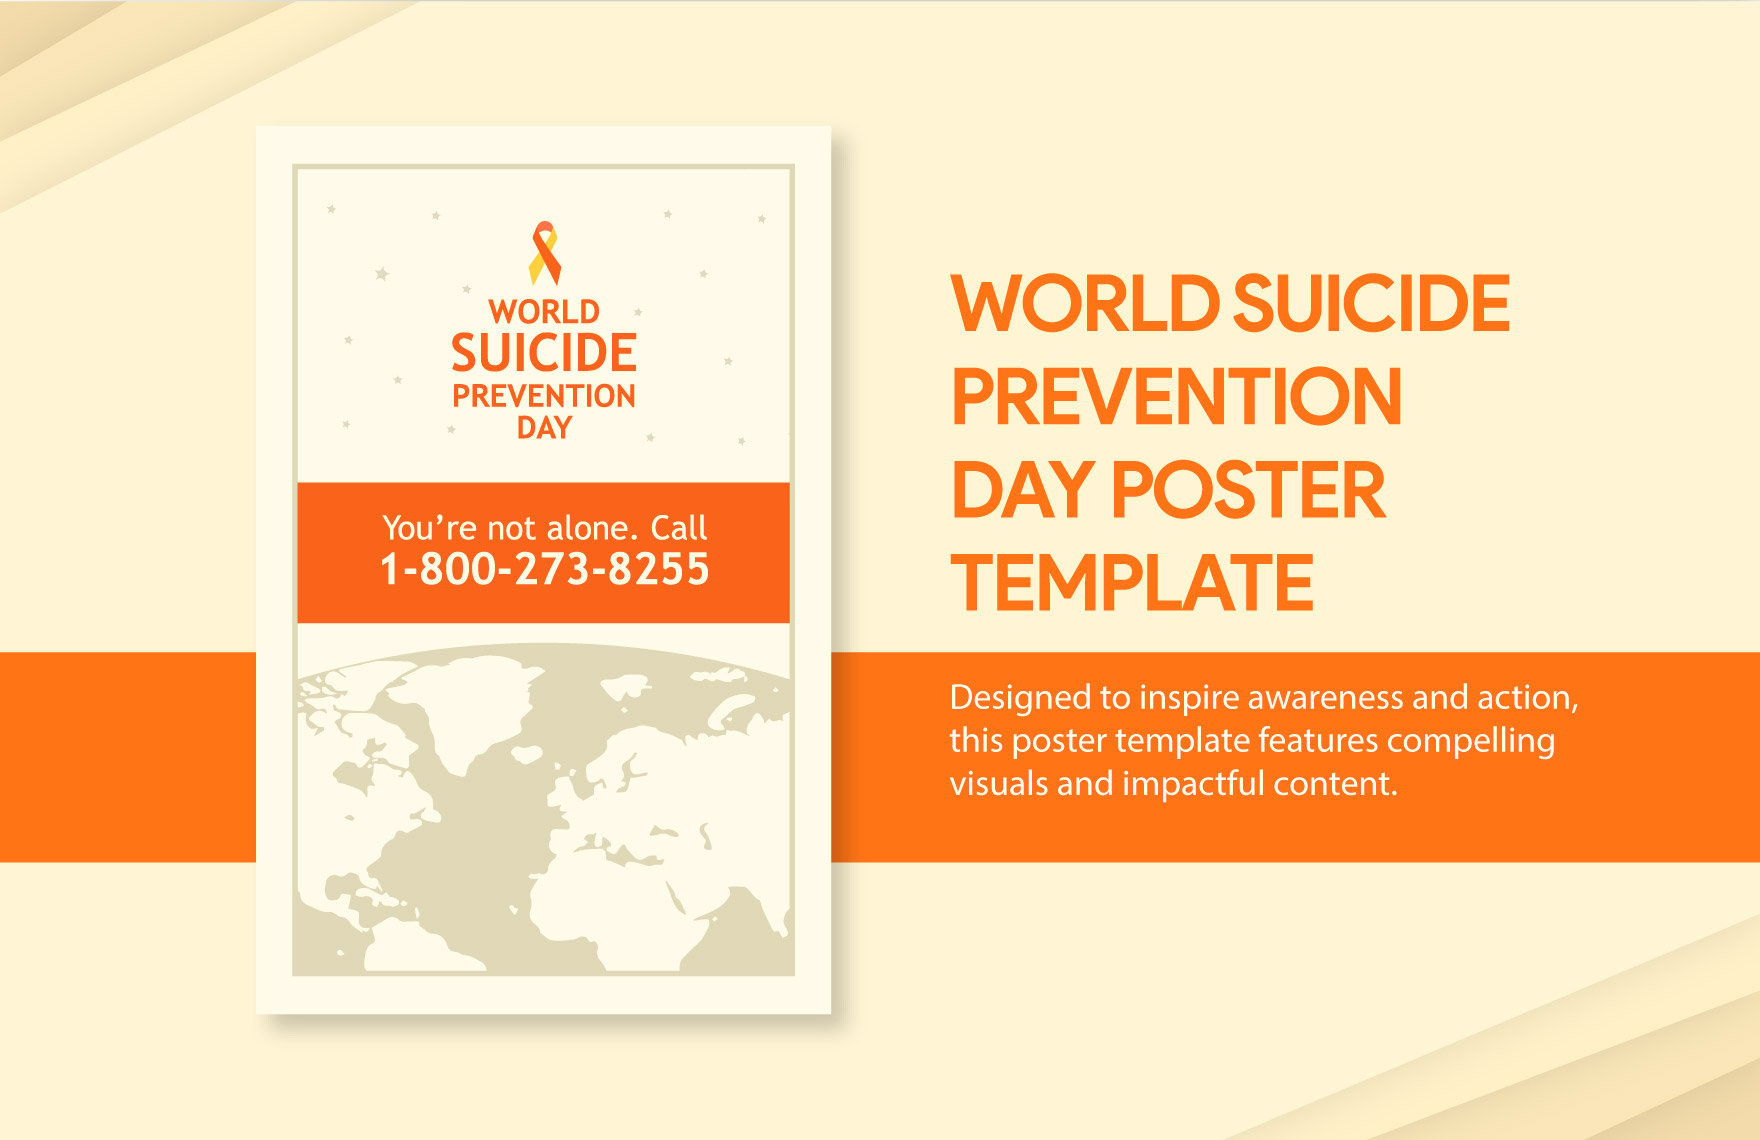 Free World Suicide Prevention Day Poster Template in Illustrator, PSD, PNG